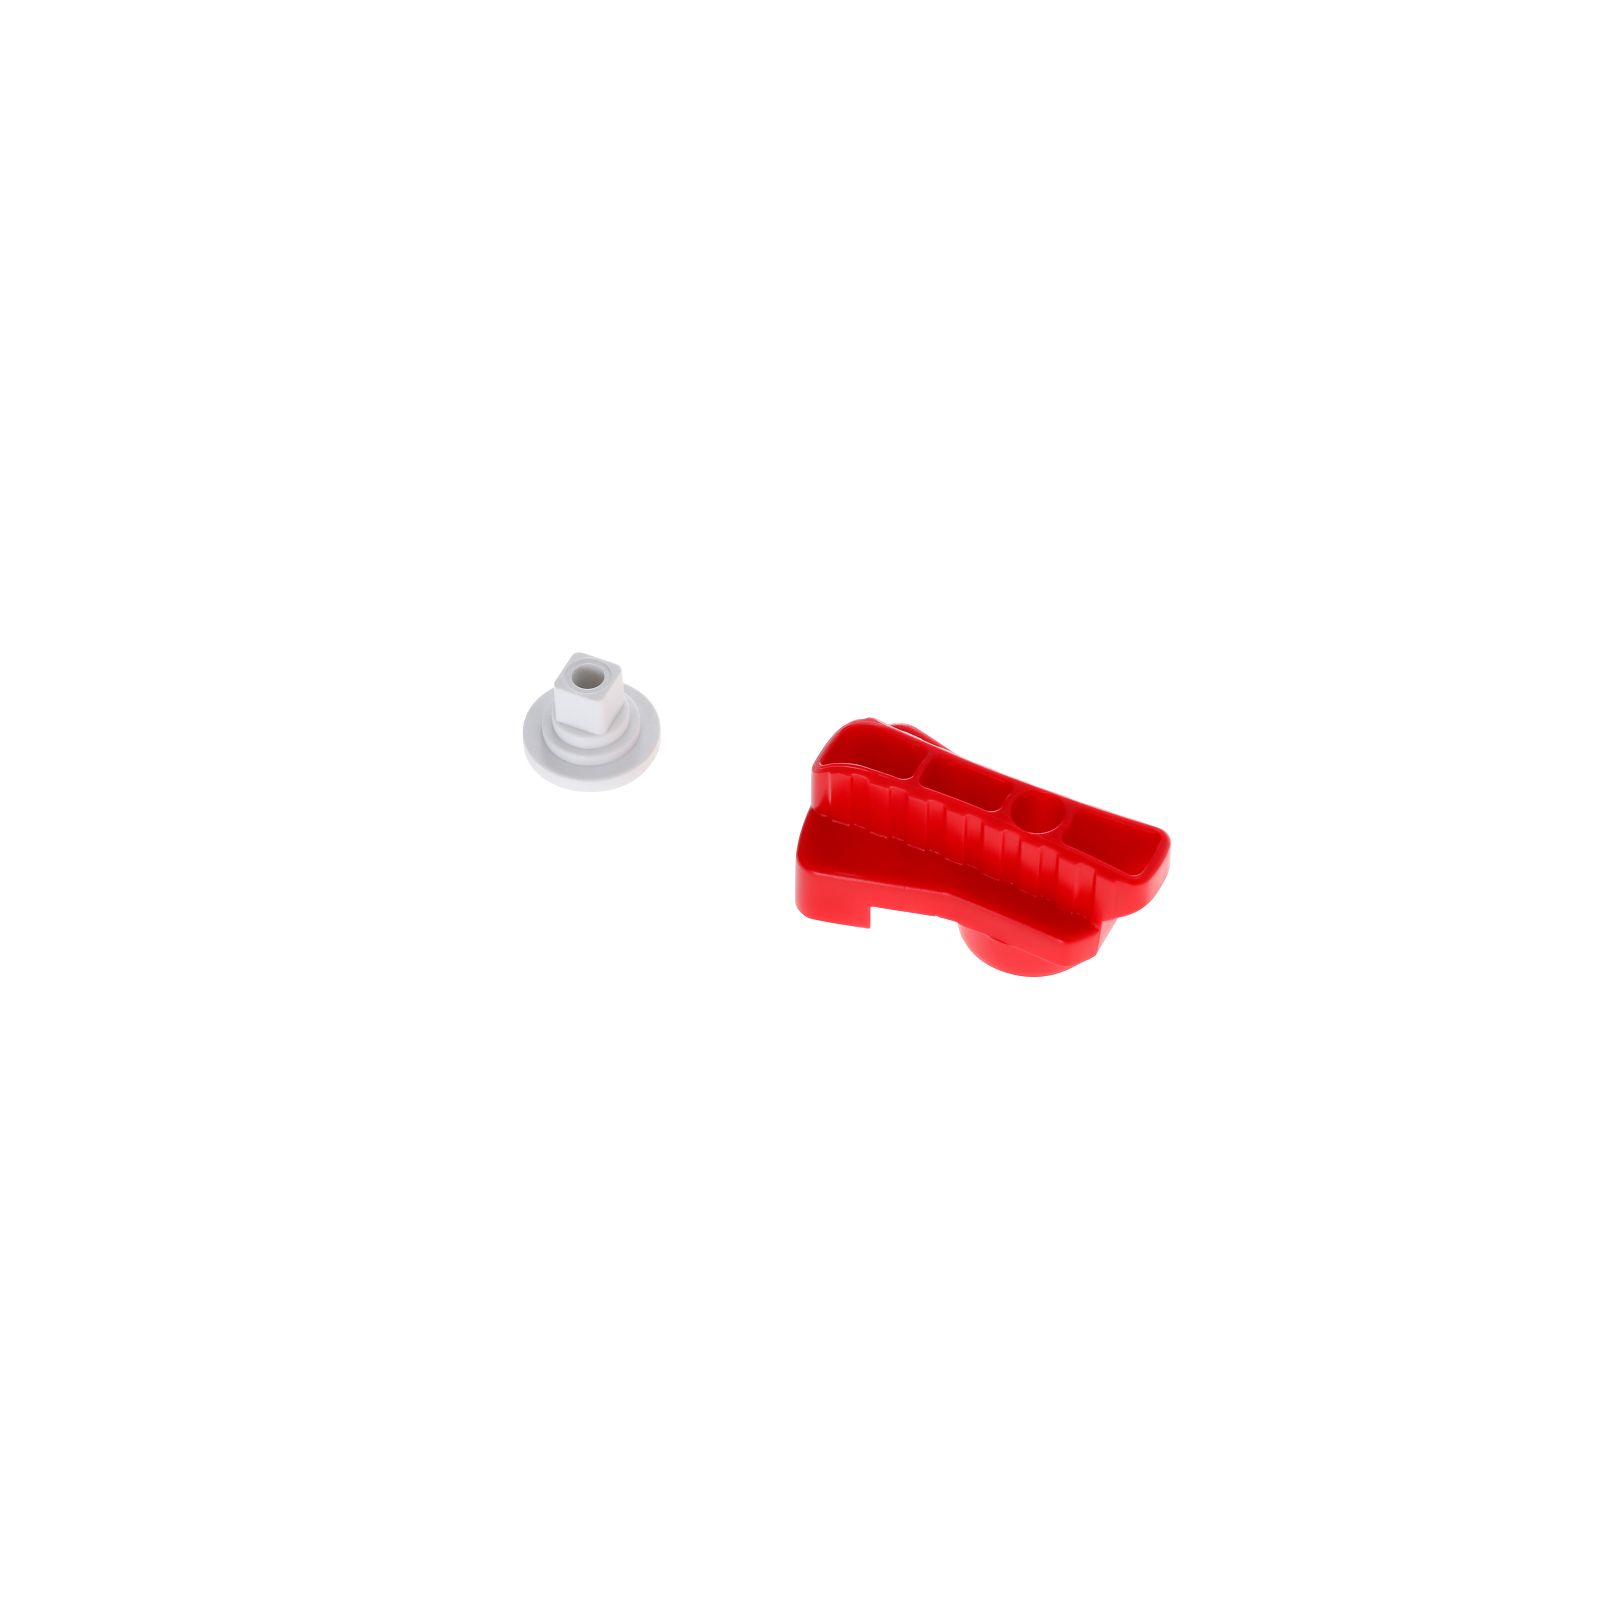 DJI Matrice 600 Spare Part 22 Red Rotatable Clamp Kit